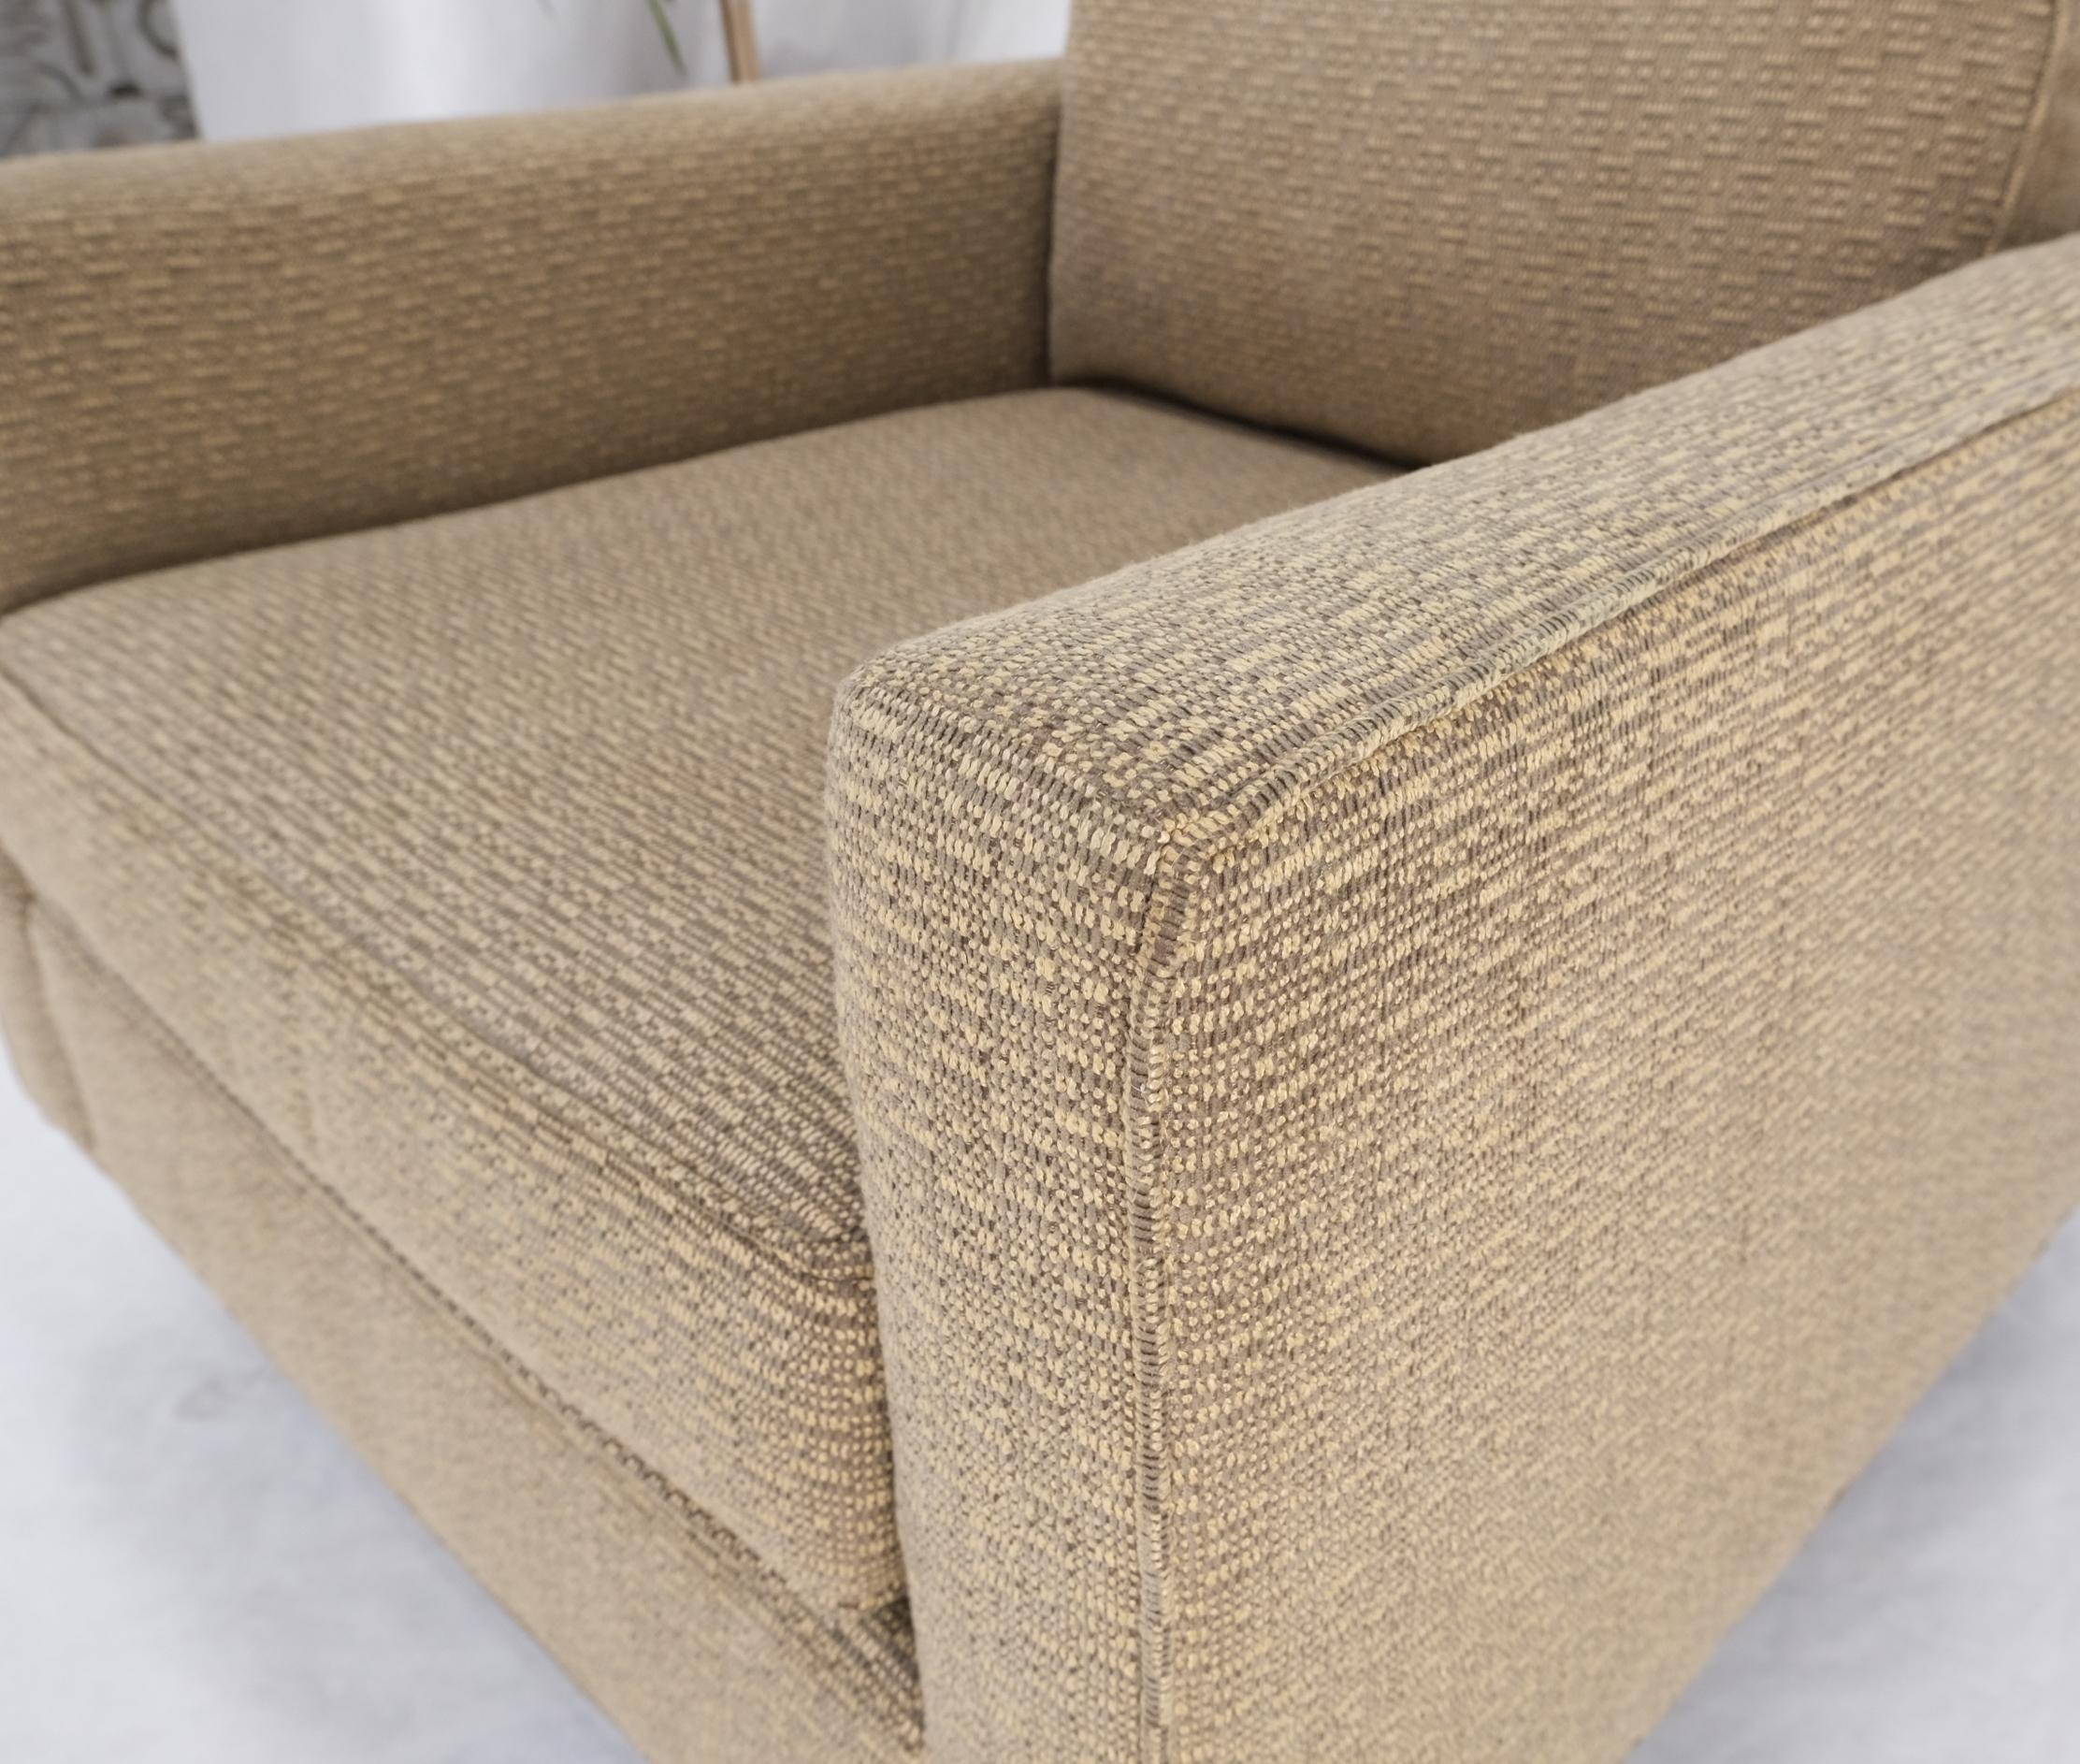 Deep Oatmeal Fabric Upholstery Contemporary Lounge Chair on Dowel Legs In Good Condition For Sale In Rockaway, NJ